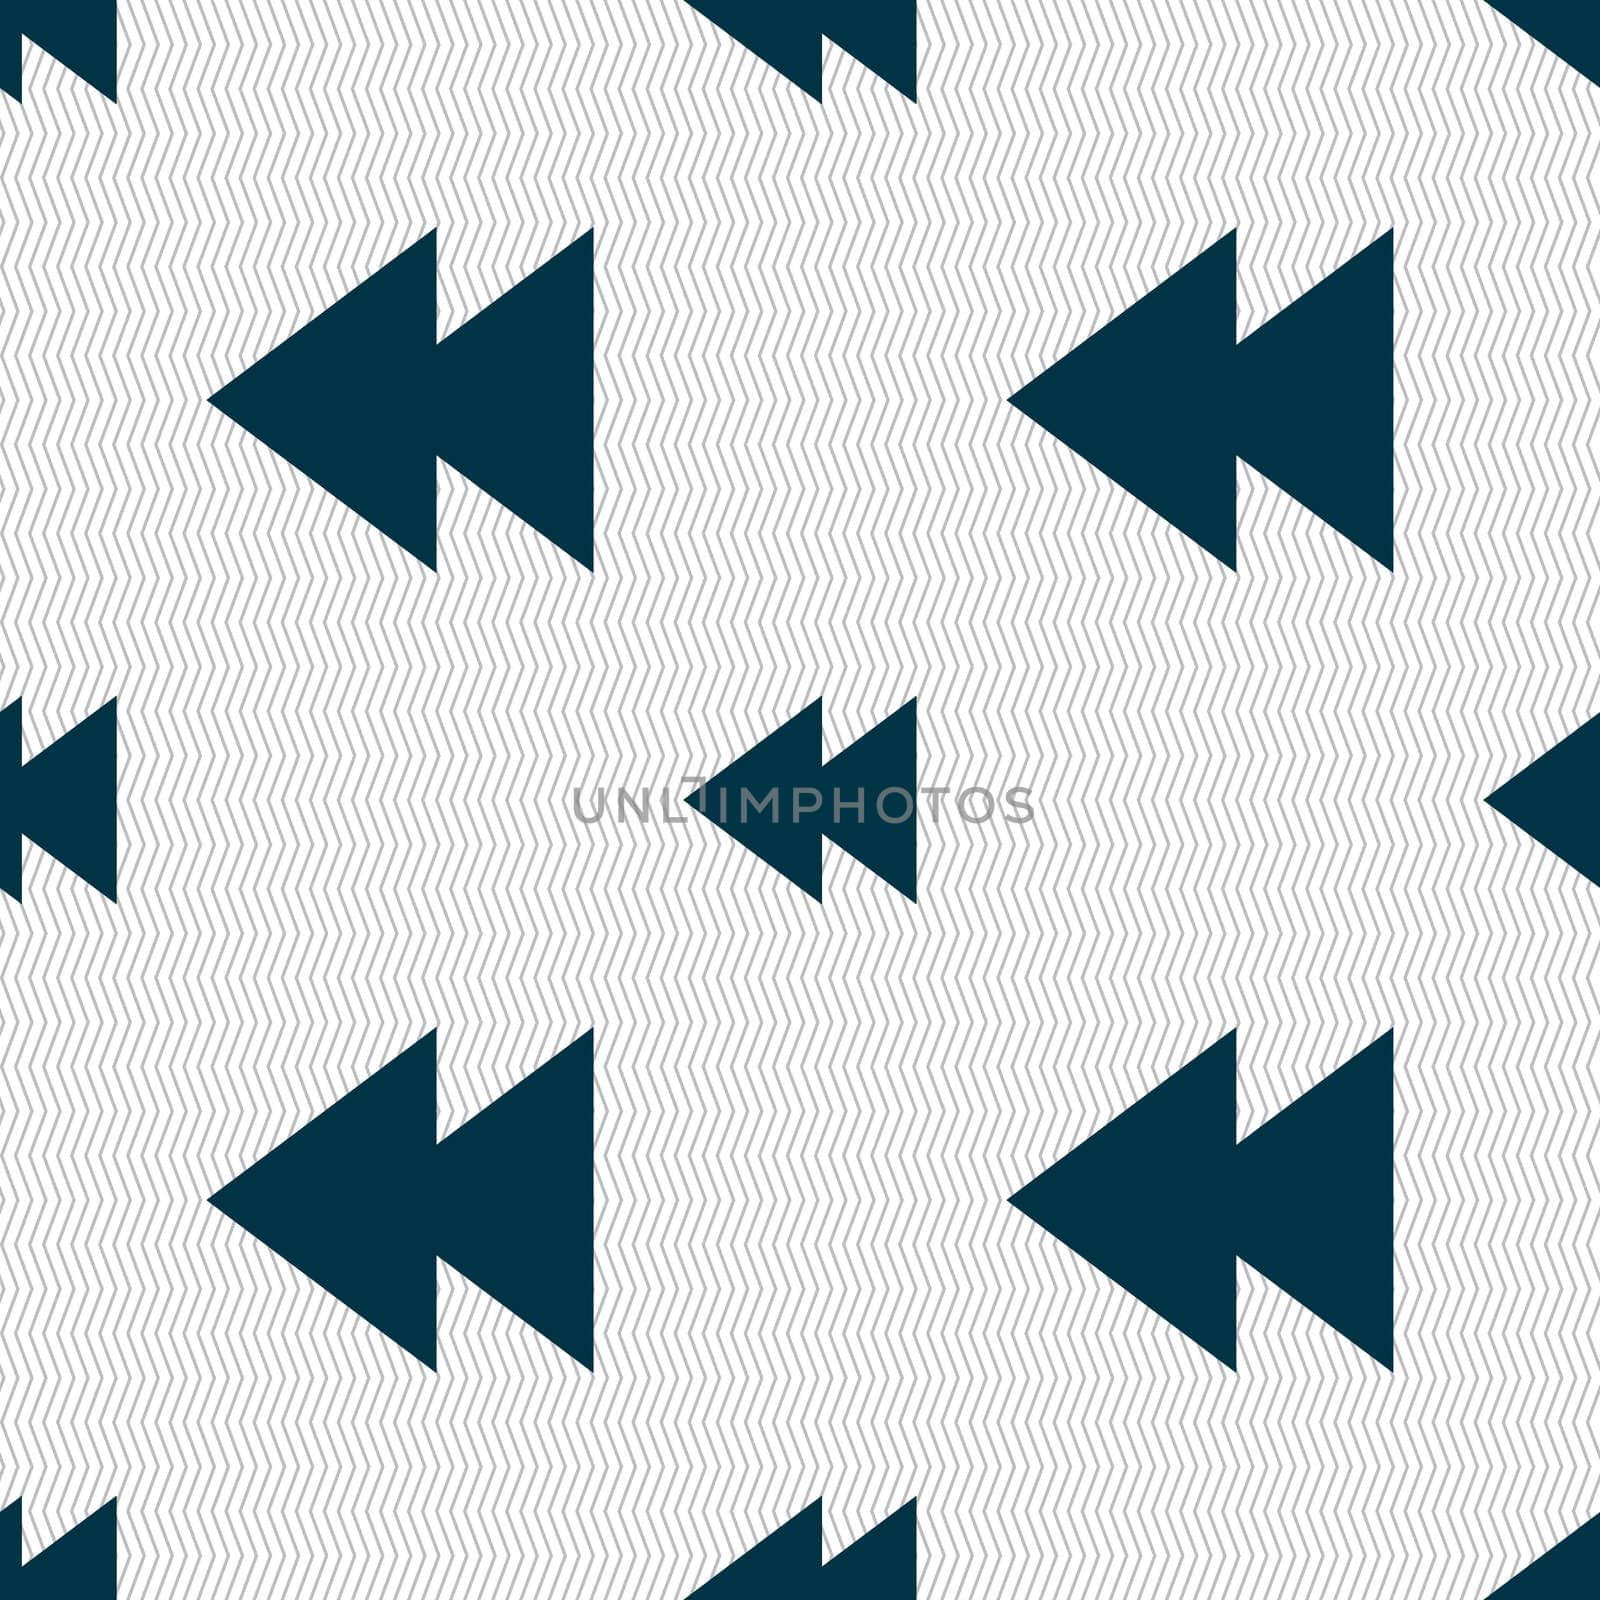 multimedia sign icon. Player navigation symbol. Seamless abstract background with geometric shapes.  by serhii_lohvyniuk